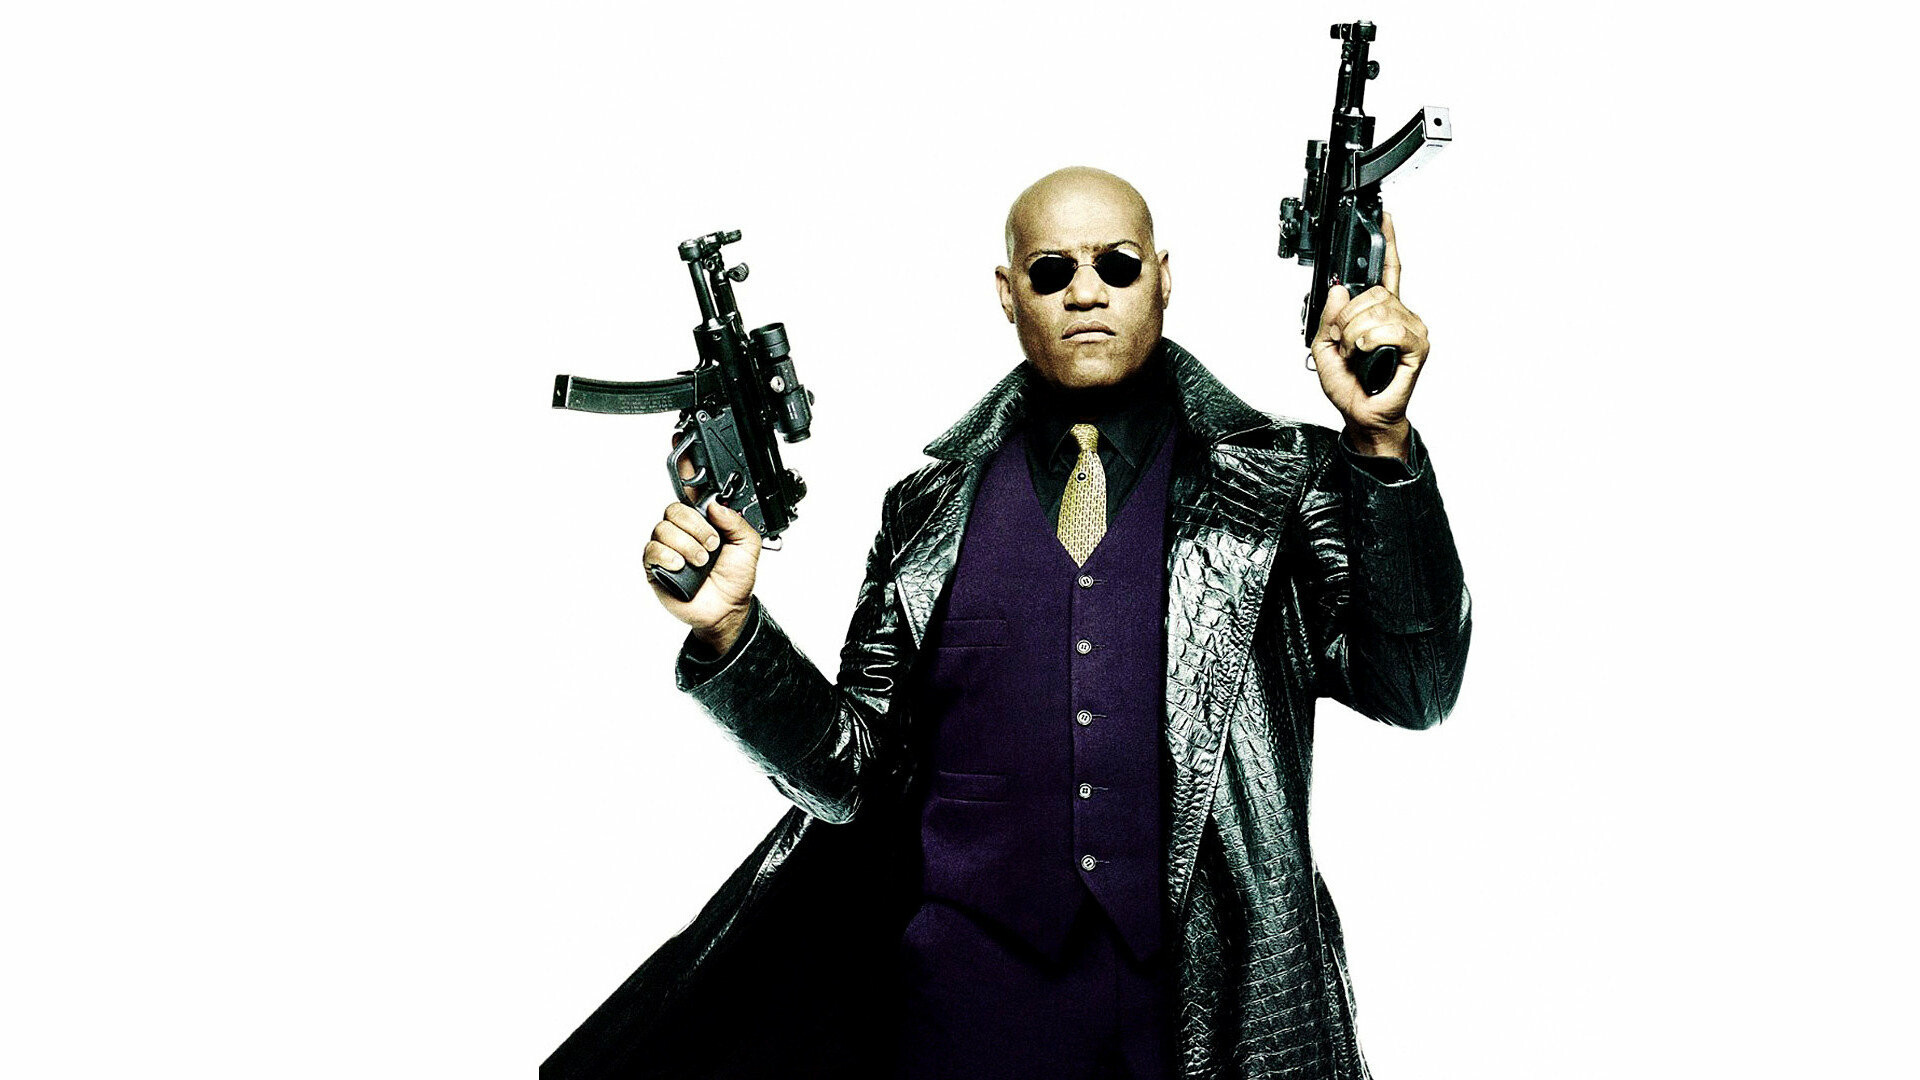 Matrix Franchise: Morpheus, Portrayed by Laurence Fishburne in the first three films. 1920x1080 Full HD Wallpaper.